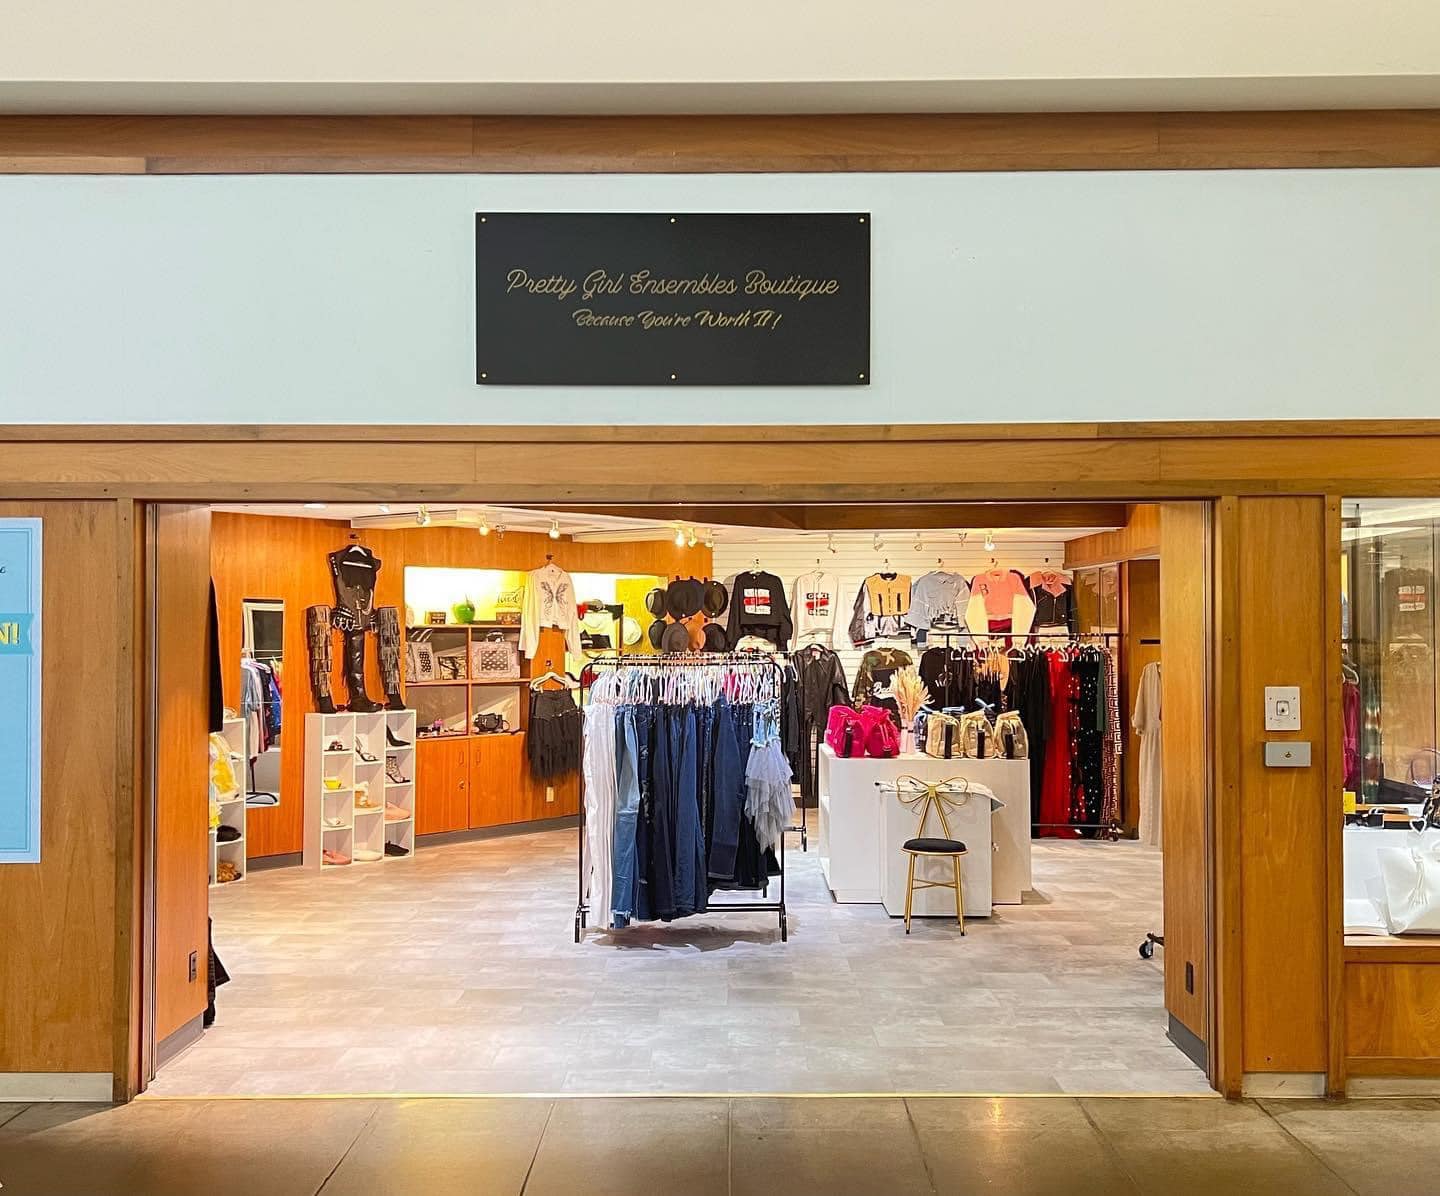 Image of a storefront surrounded by warm brown wood. The back white wall has a variety of jackets and in the foreground are racks of jeans and dresses. Shoes and accessories take up the left wall.